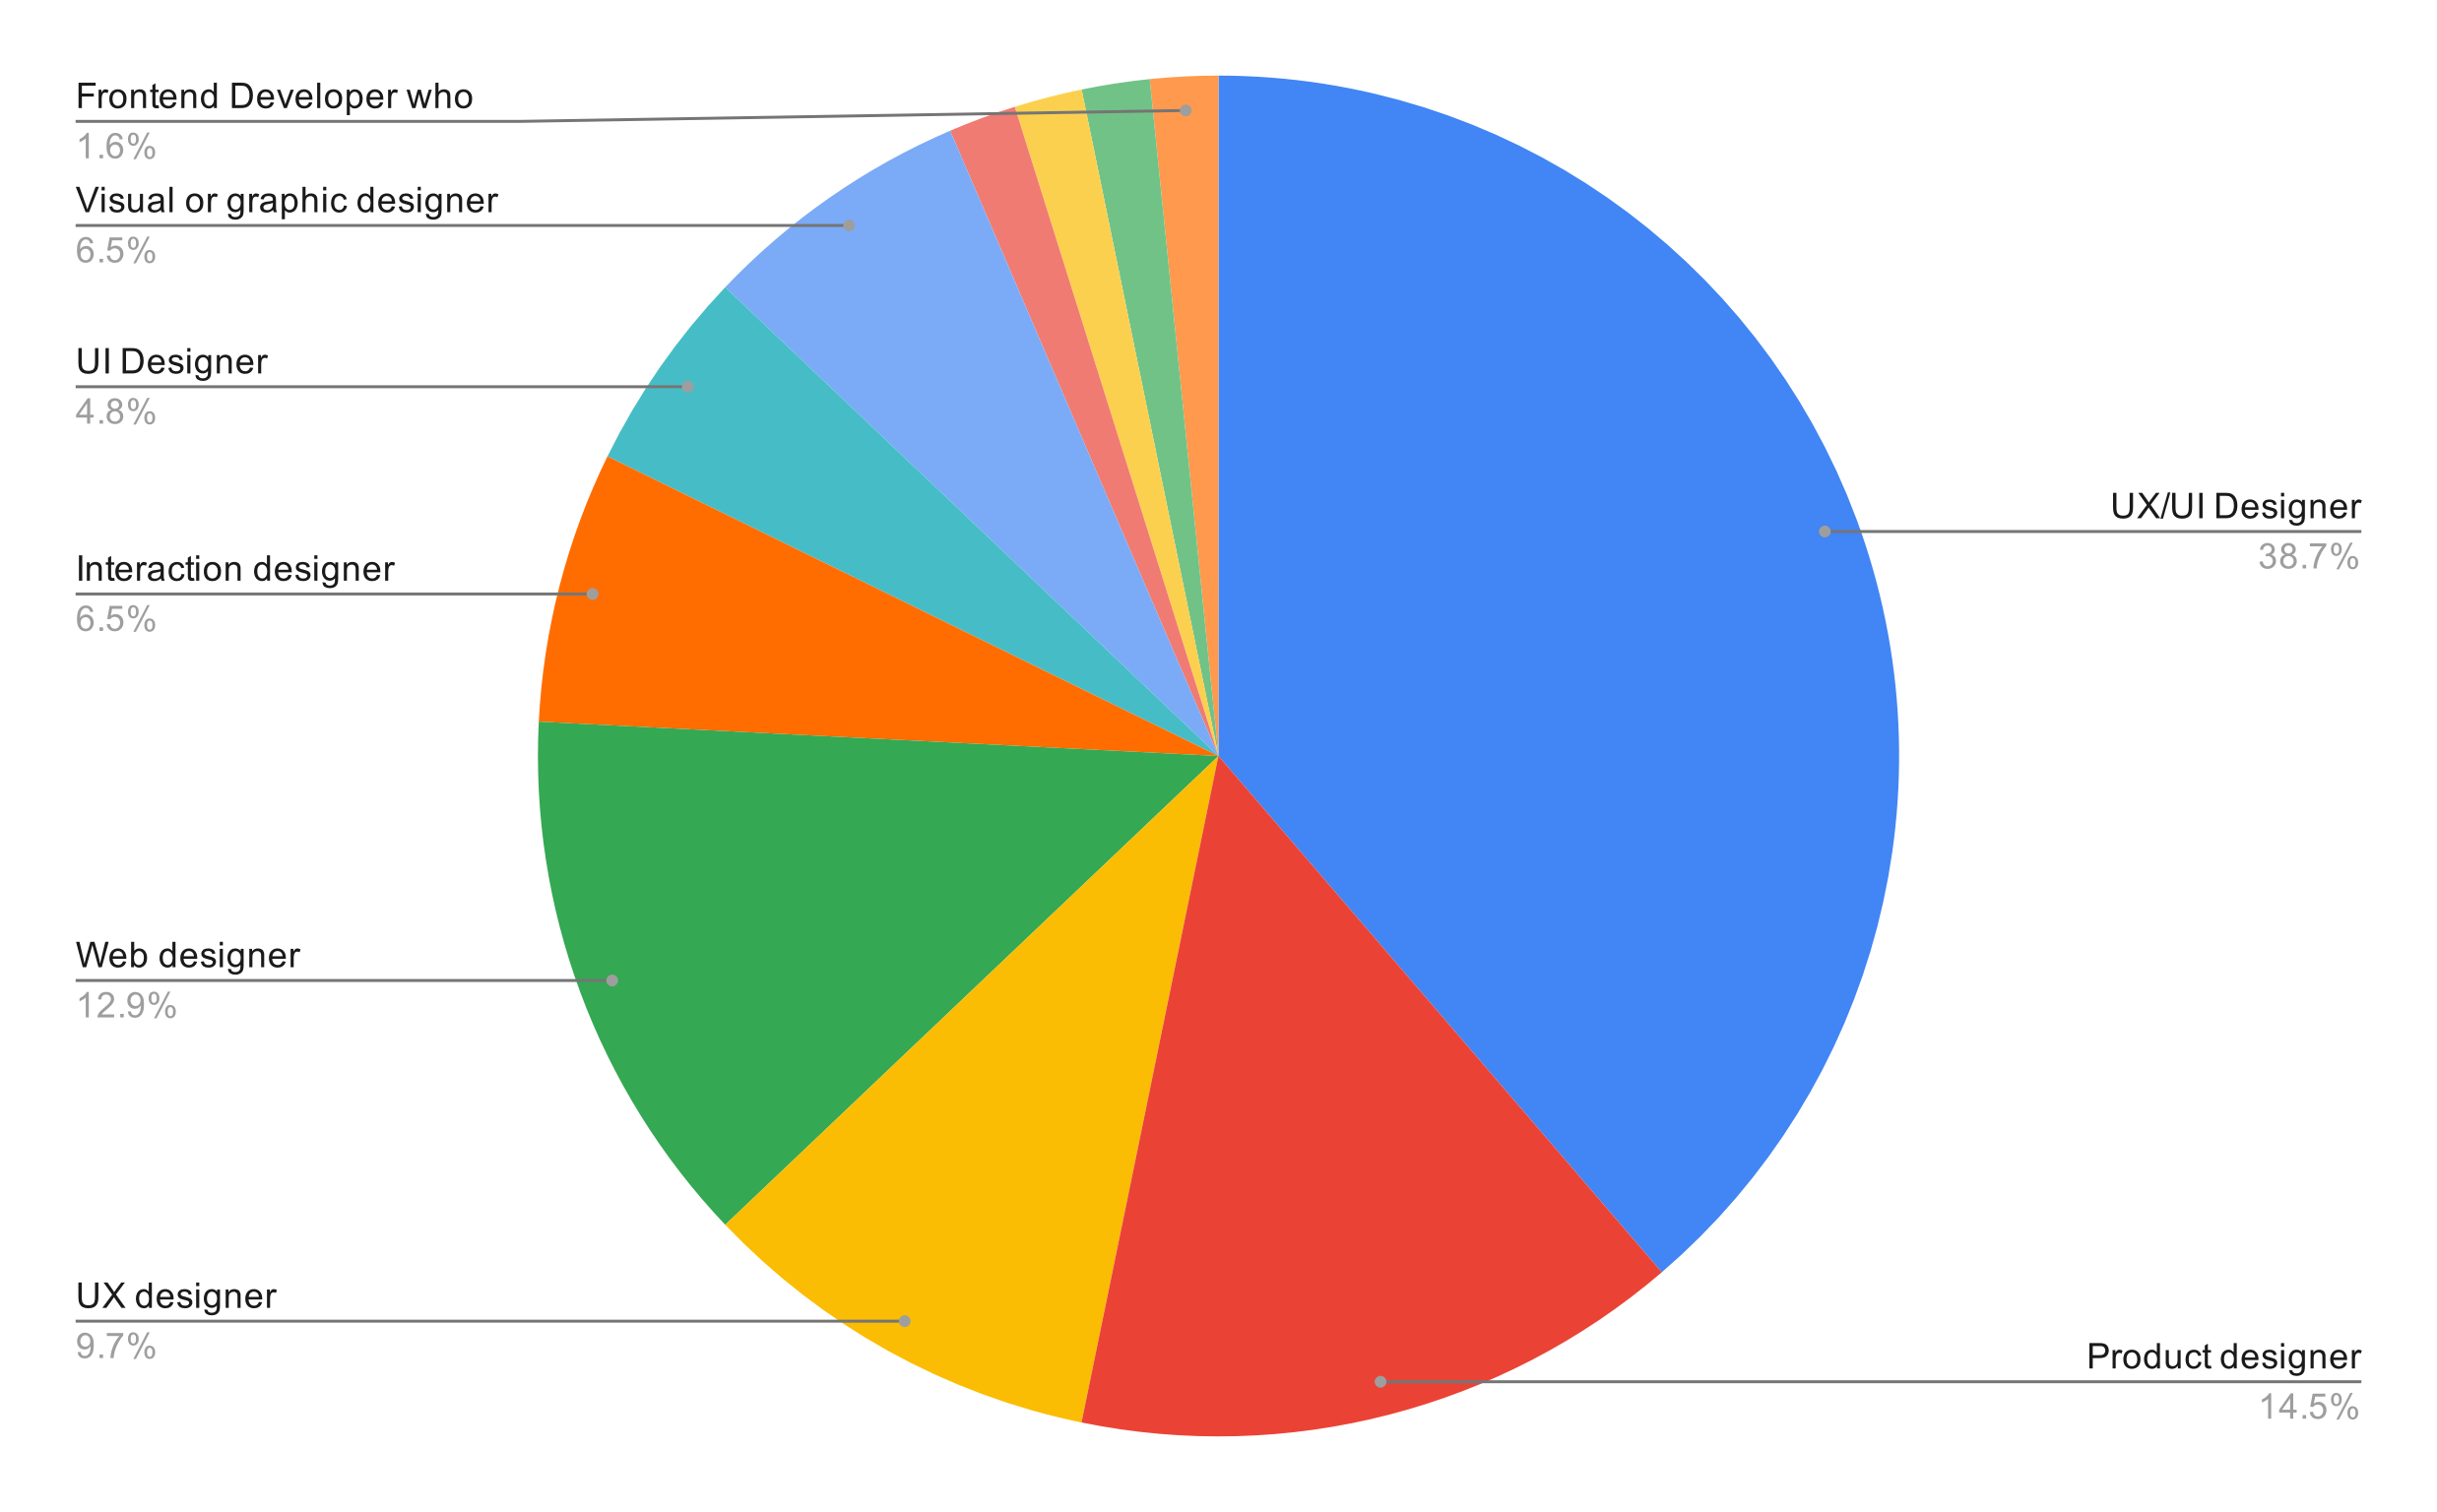 Pie chart showing designer types who answered survey